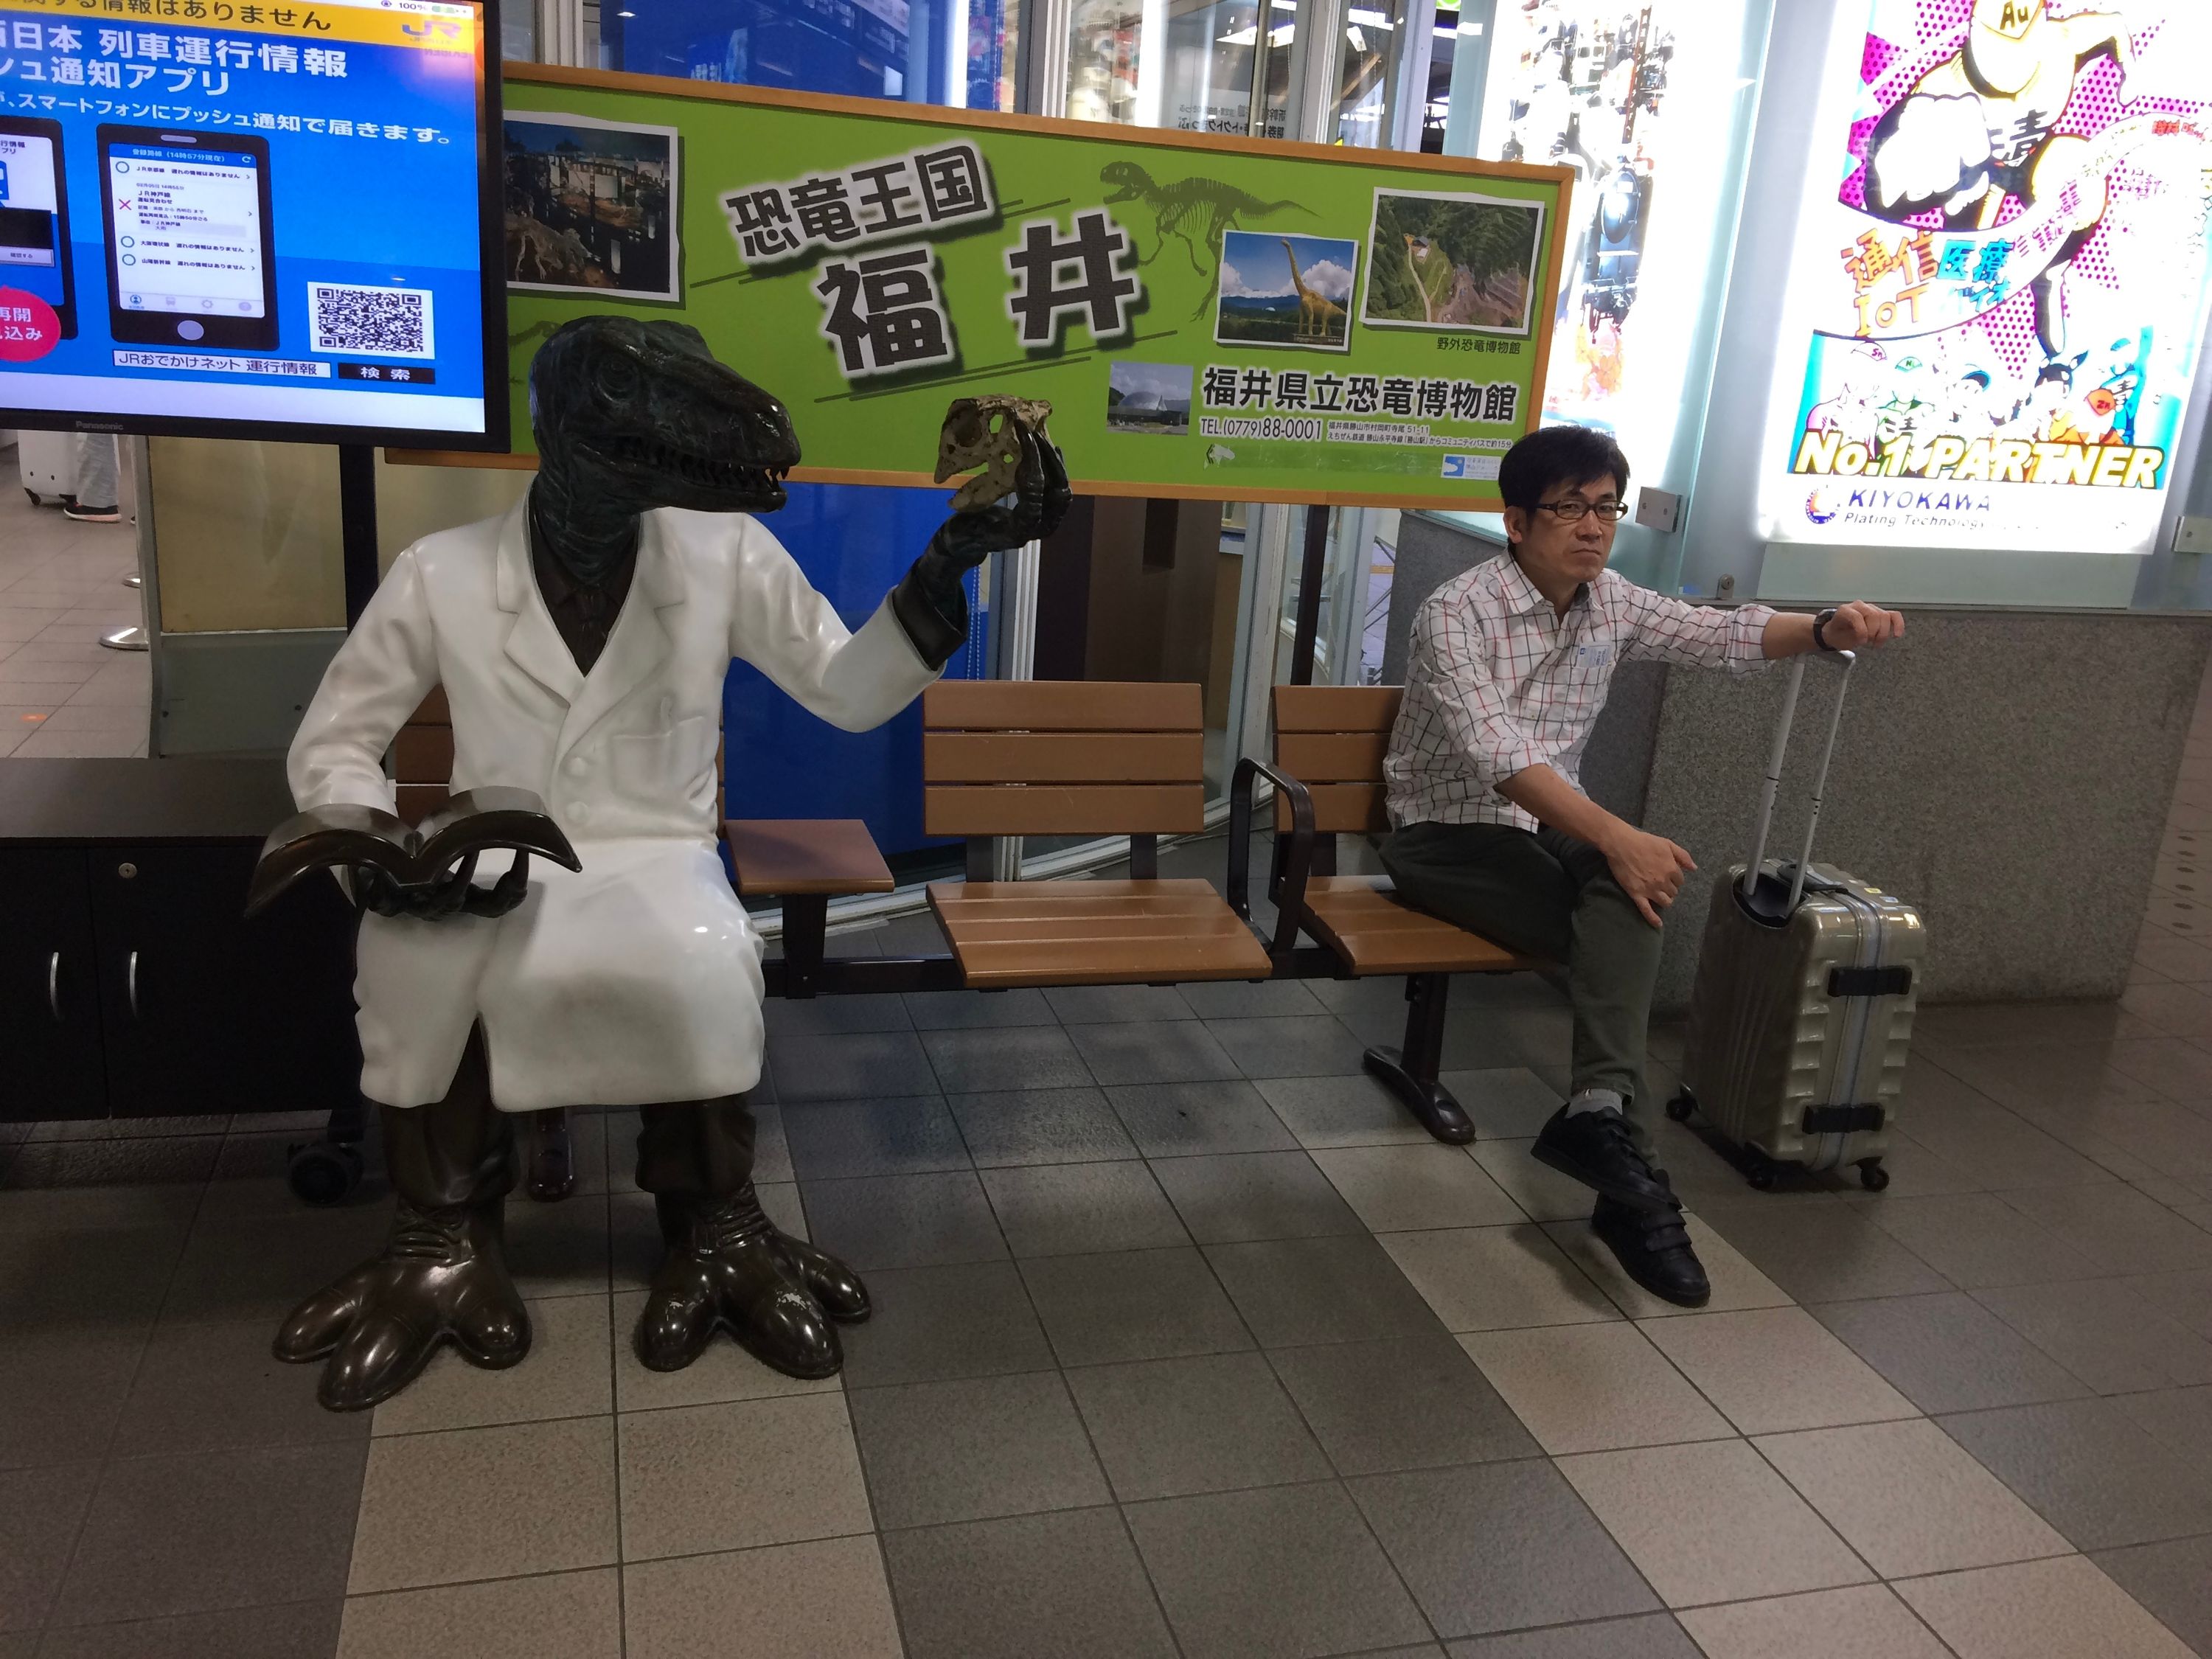 A Deinonychus-like dinosaur, dressed in a lab coat and examining the skull of what appears to be a Fukuisaurus, sits on a bench next to a middle-aged man resting his left hand on a wheeled suitcase.